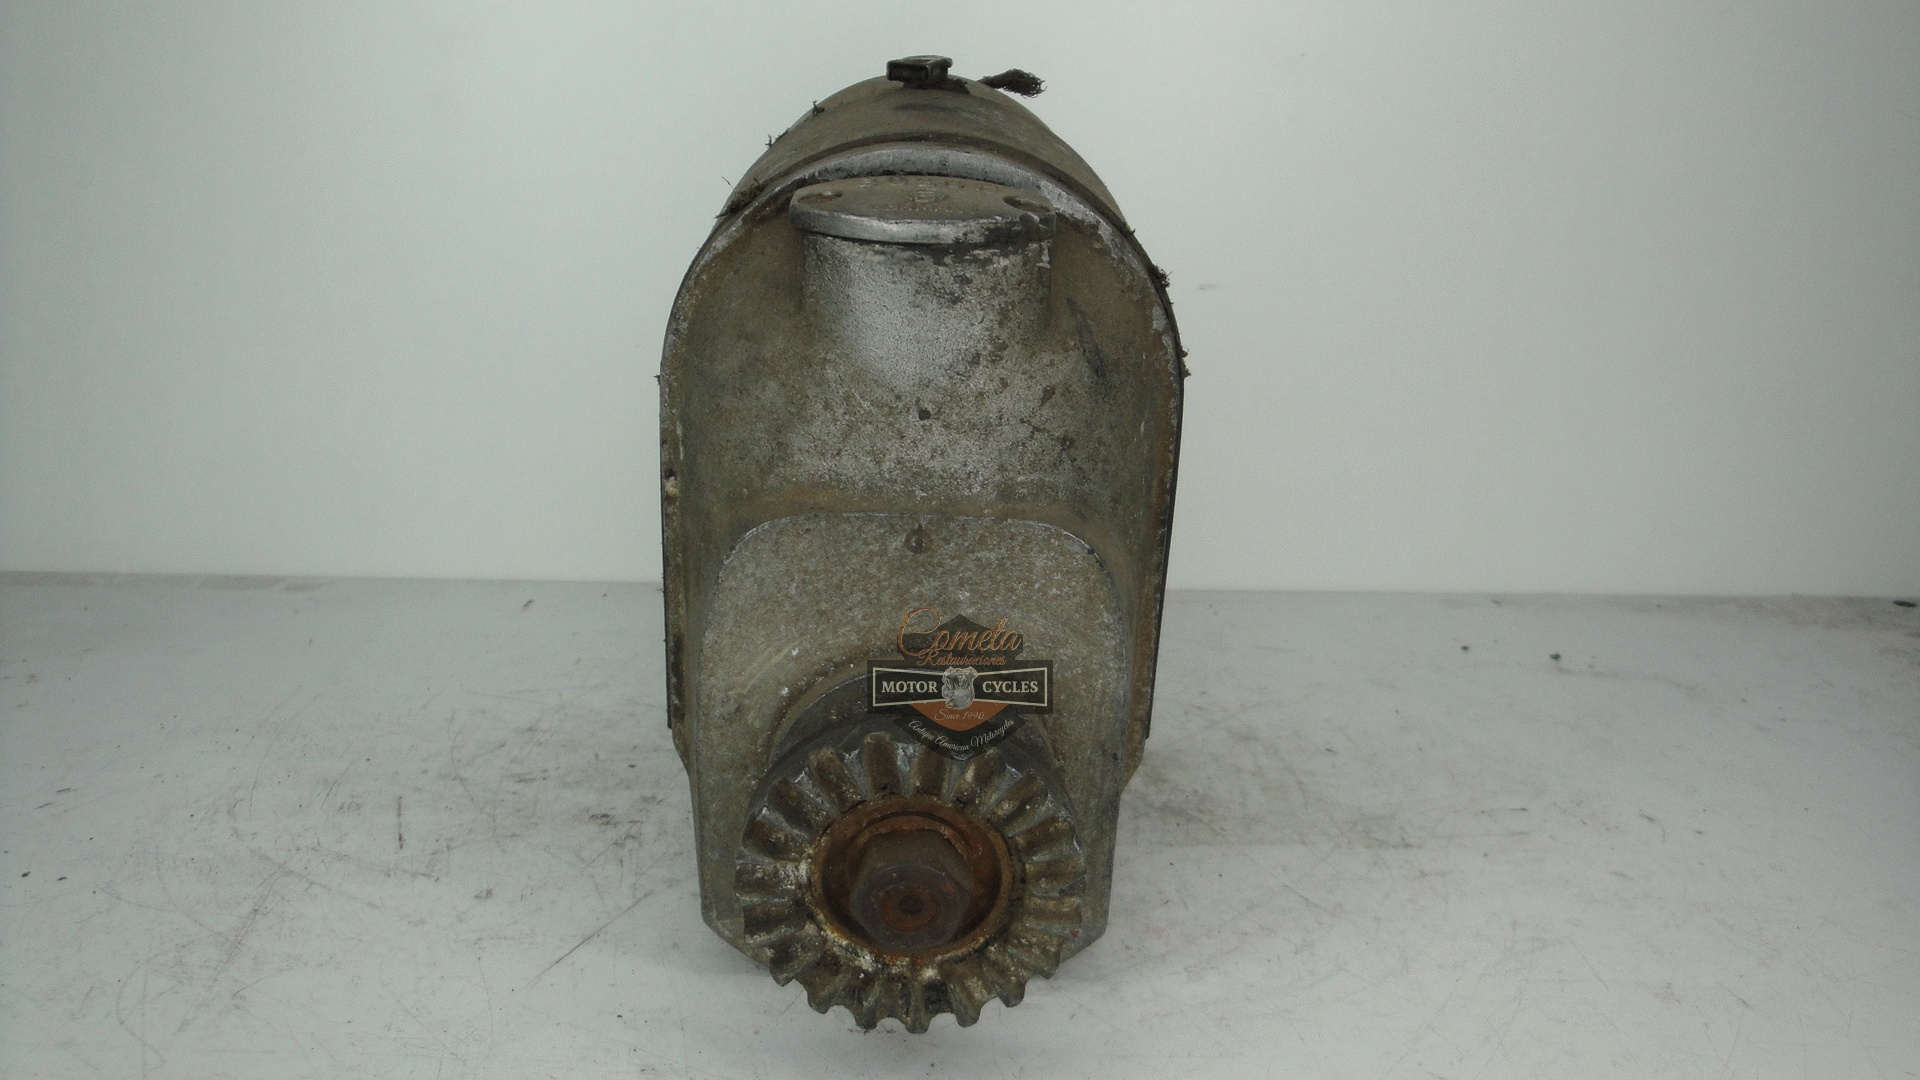 MAGNETO BOSCH TYPE FR4C RS14 COCHE / TRACTOR / CAMION  AÑOS  1920 A 1930 